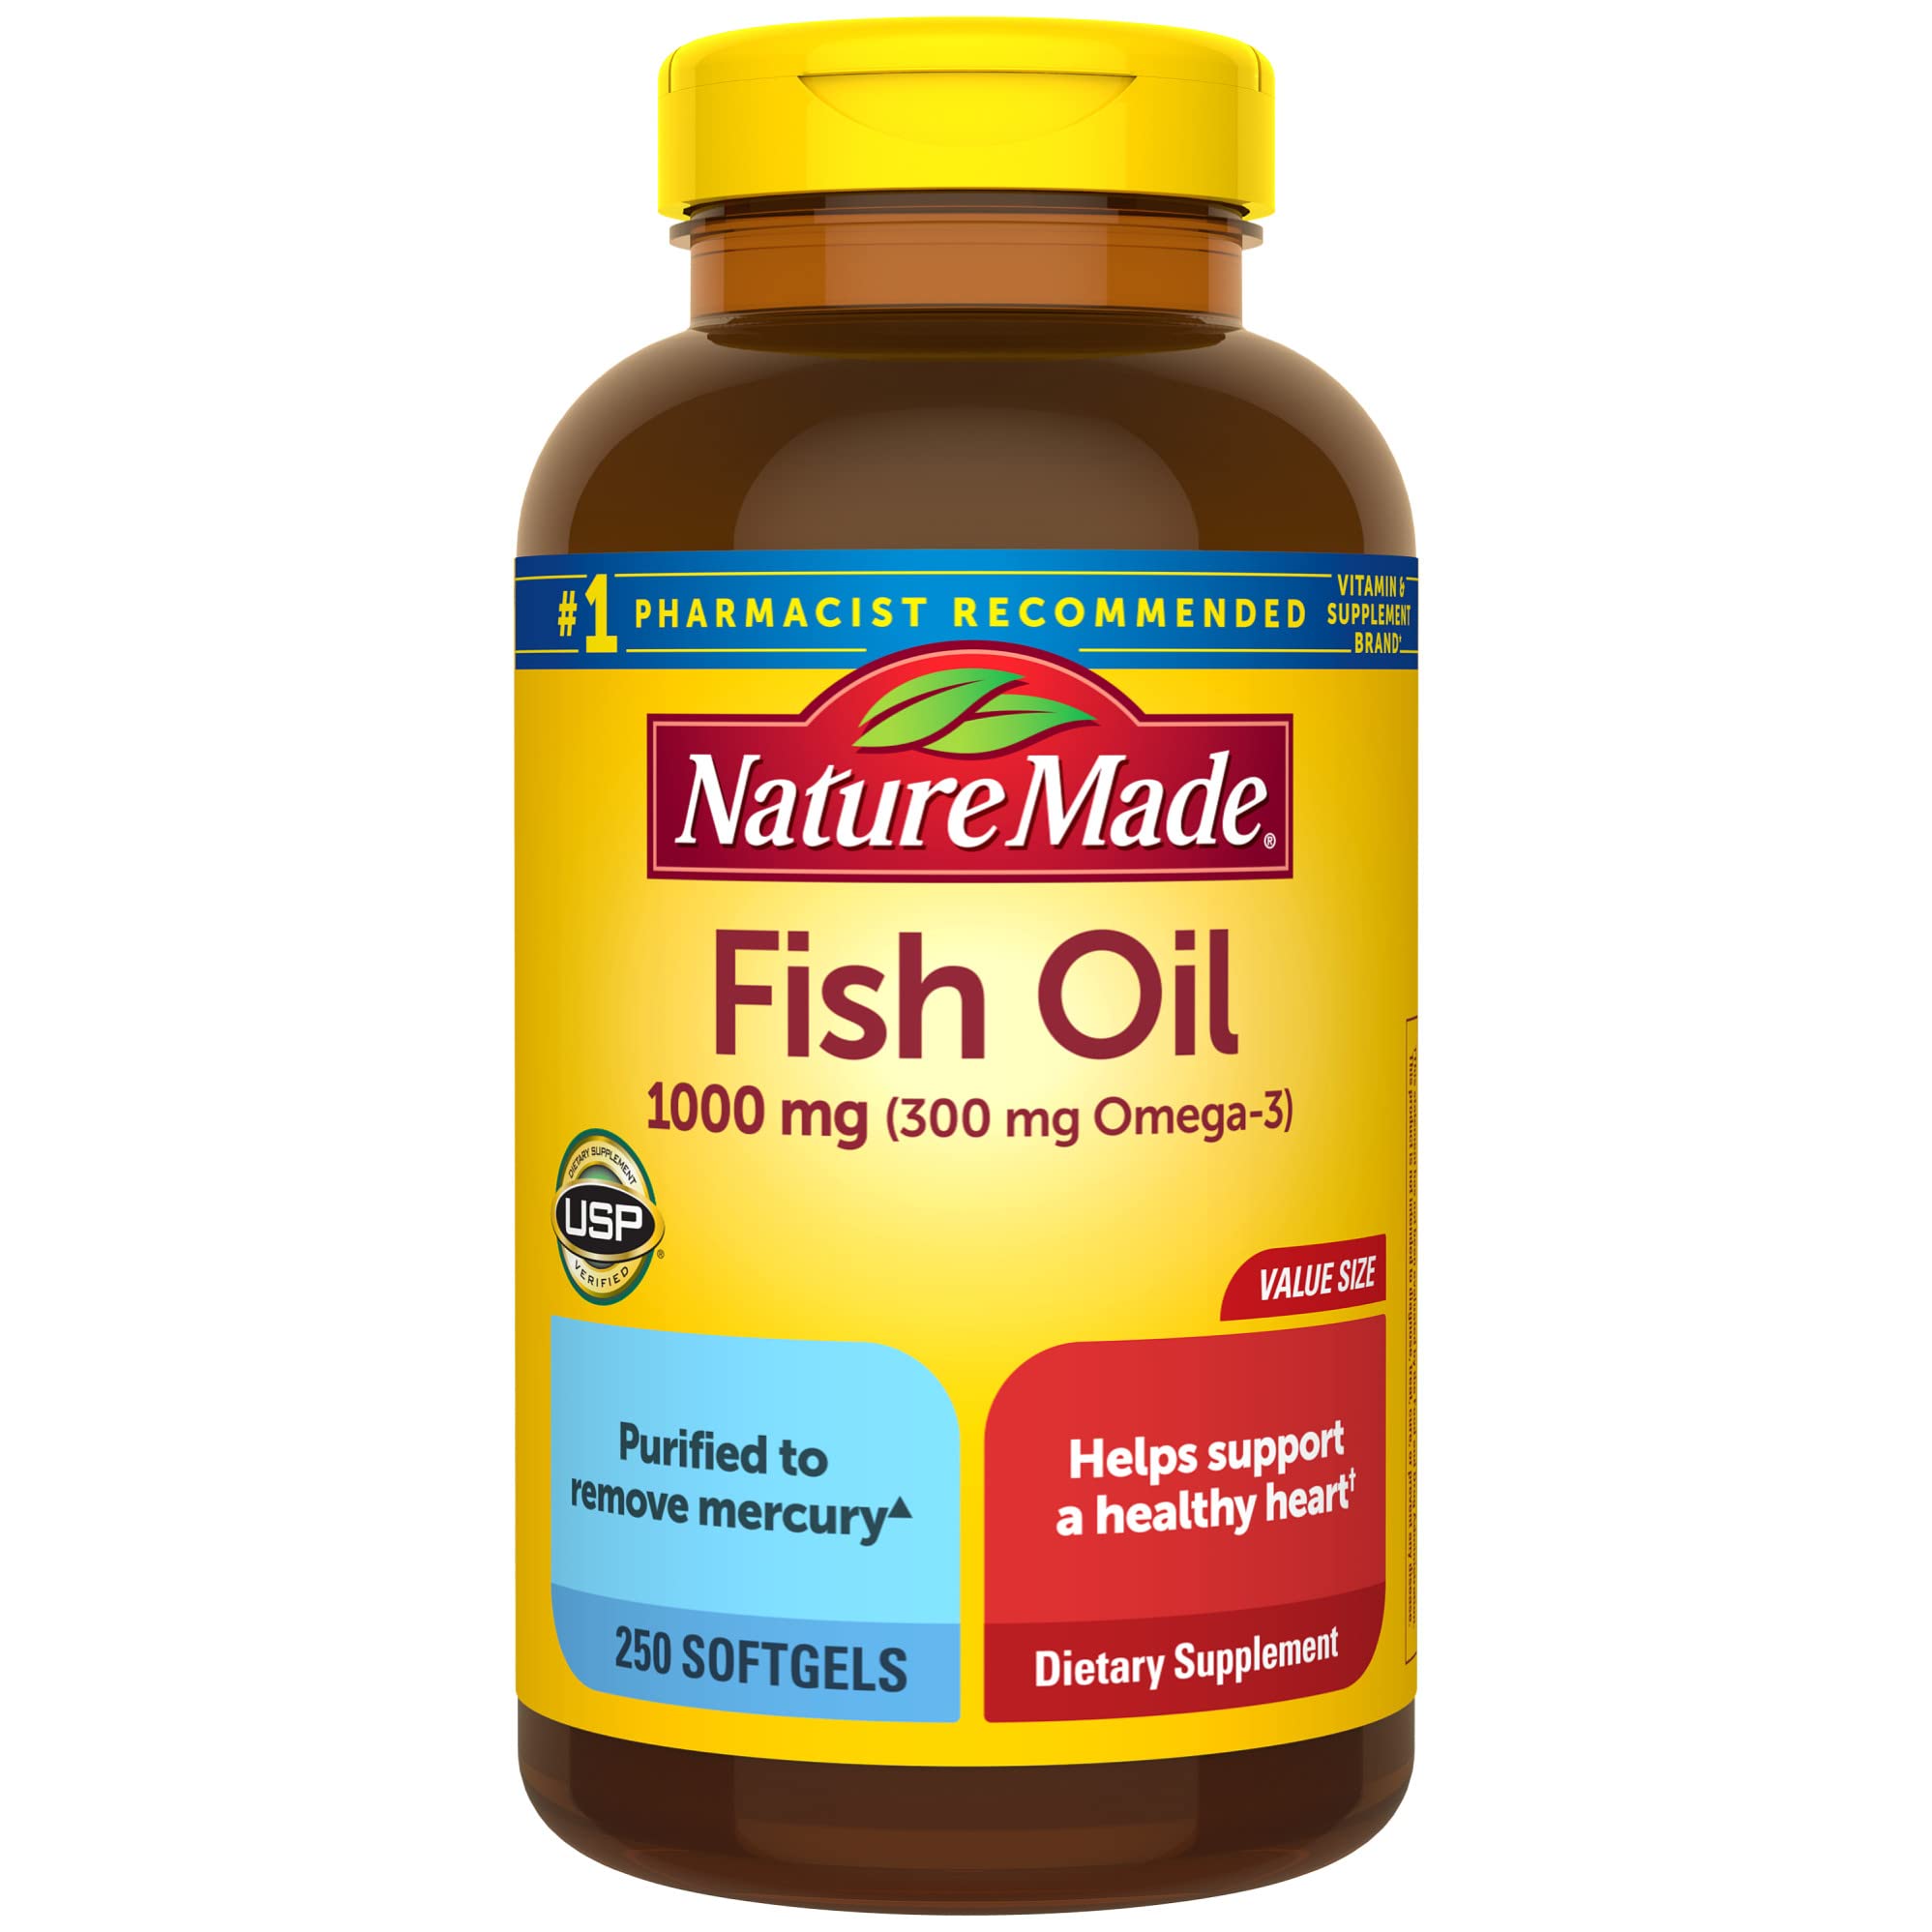 Nature Made Fish Oil 1000 mg Softgels, Fish Oil Supplements, Omega 3 Fish Oil for Healthy Heart Support, Omega 3 Supplement with 250 Softgels, 125 Day Supply